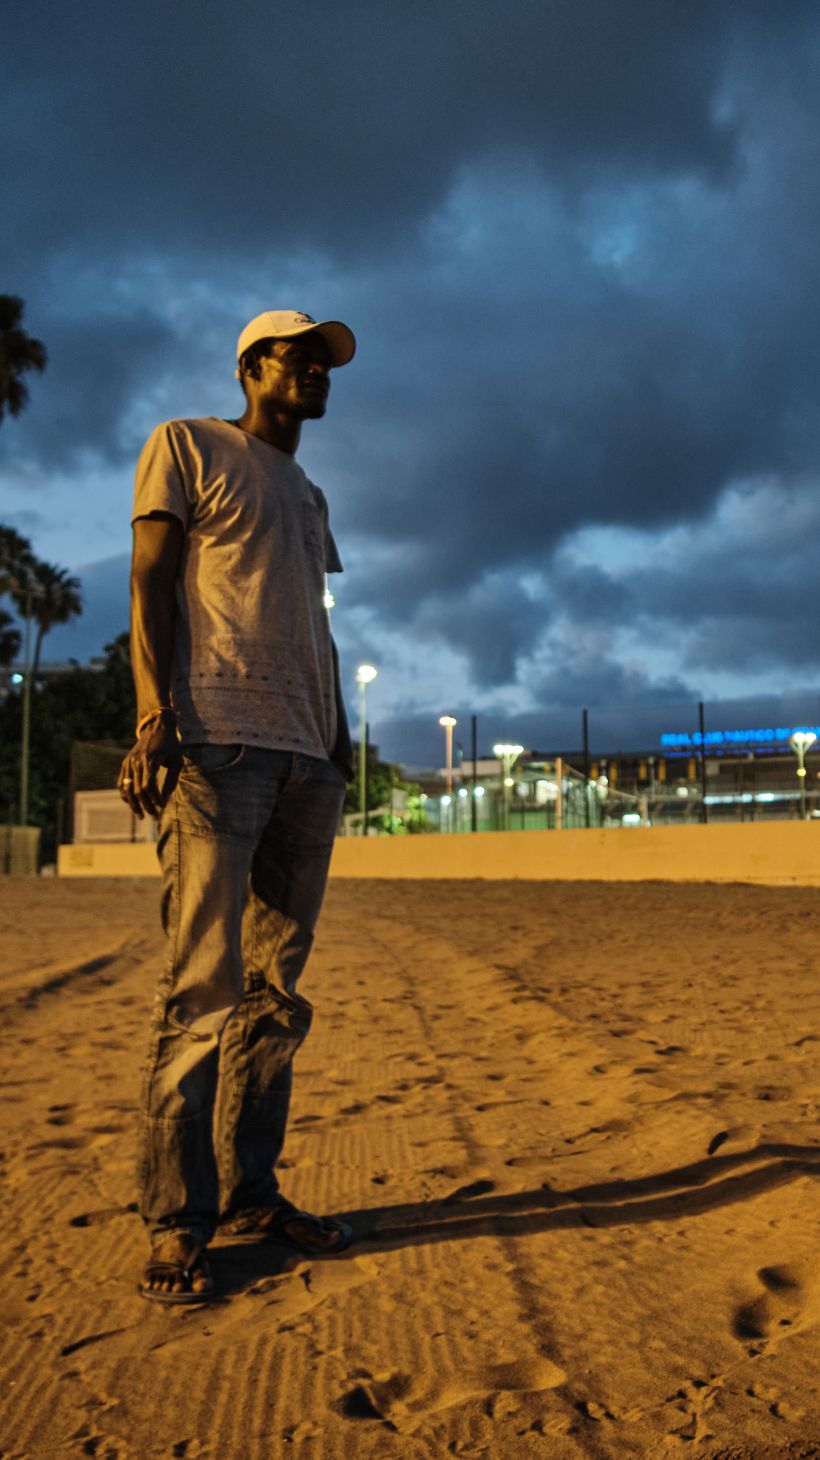 A photo of Ousmane, standing on a beach.